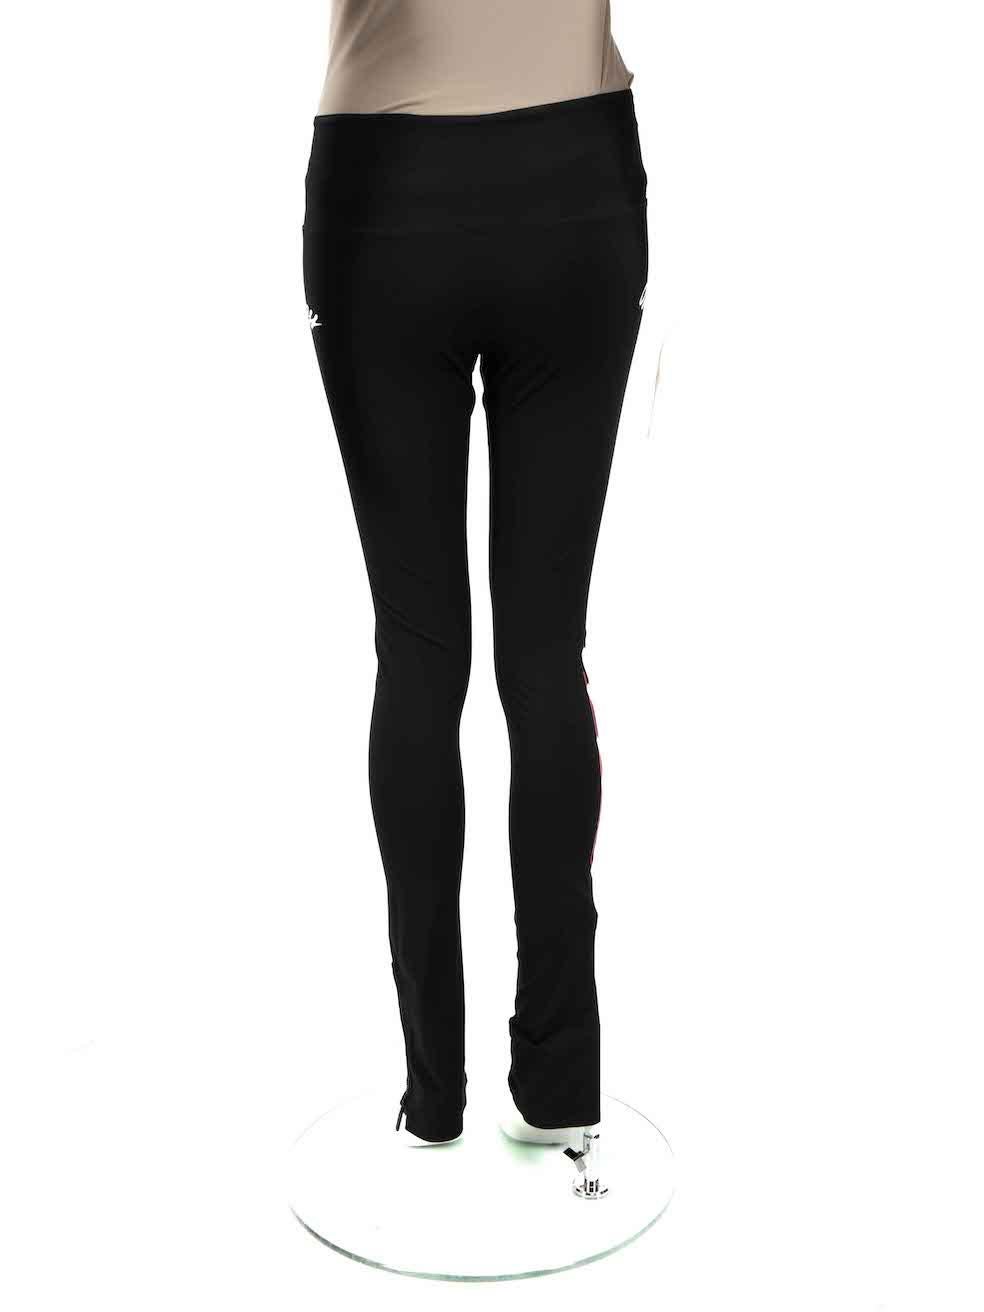 Off-White Black Stretch Zip Detail Logo Leggings Size S In Good Condition For Sale In London, GB